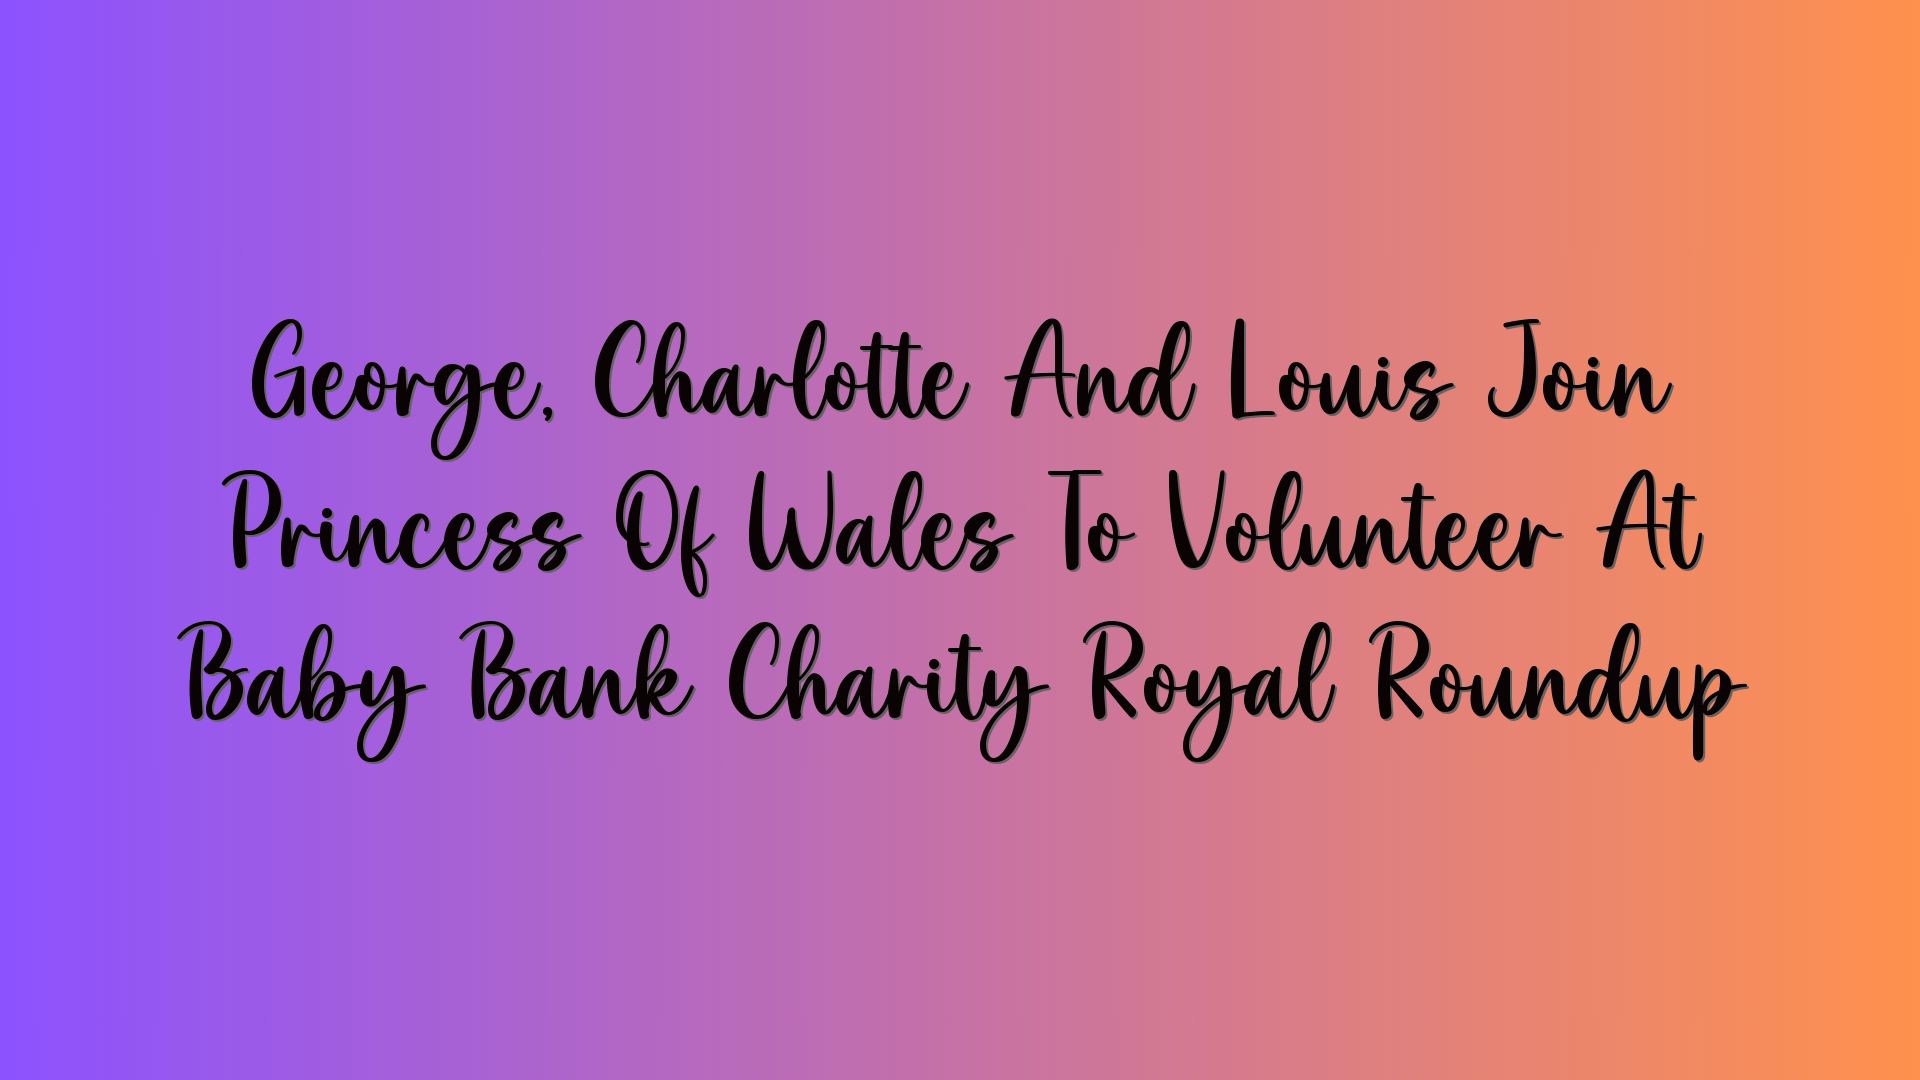 George, Charlotte And Louis Join Princess Of Wales To Volunteer At Baby Bank Charity Royal Roundup